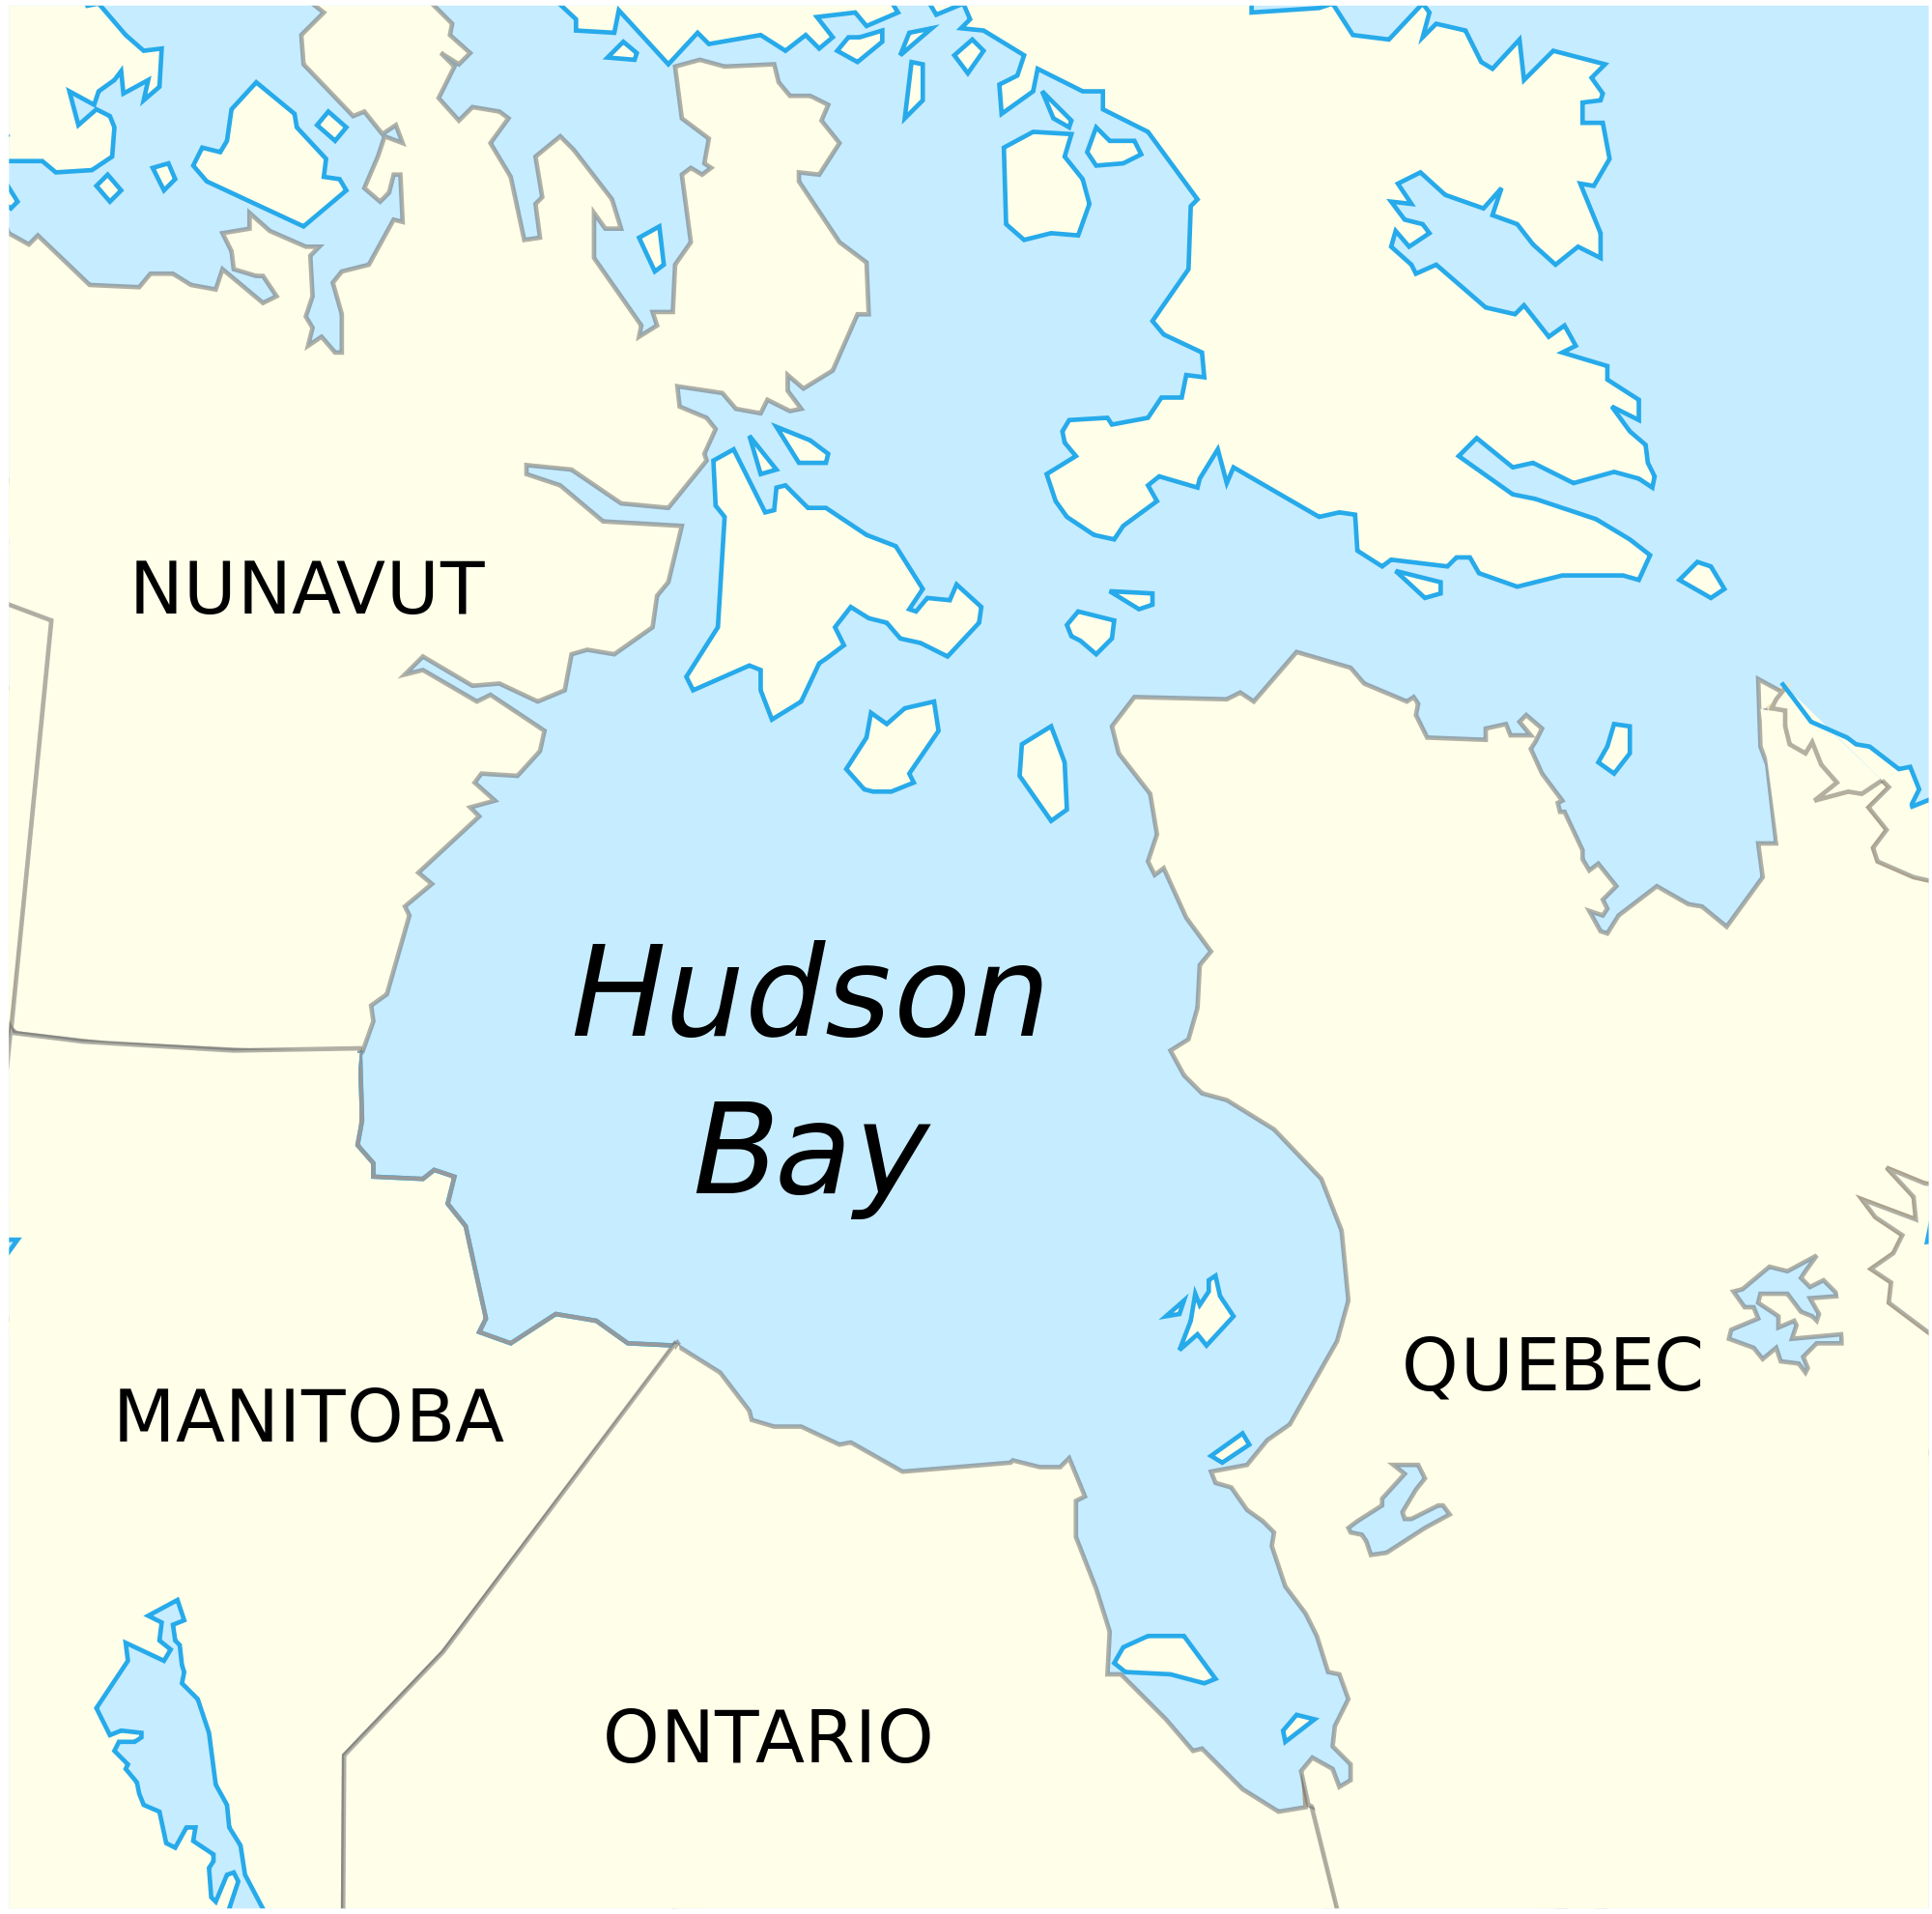 The Hudson Bay region of Canada has been found to have less gravity than the rest of the Earth.